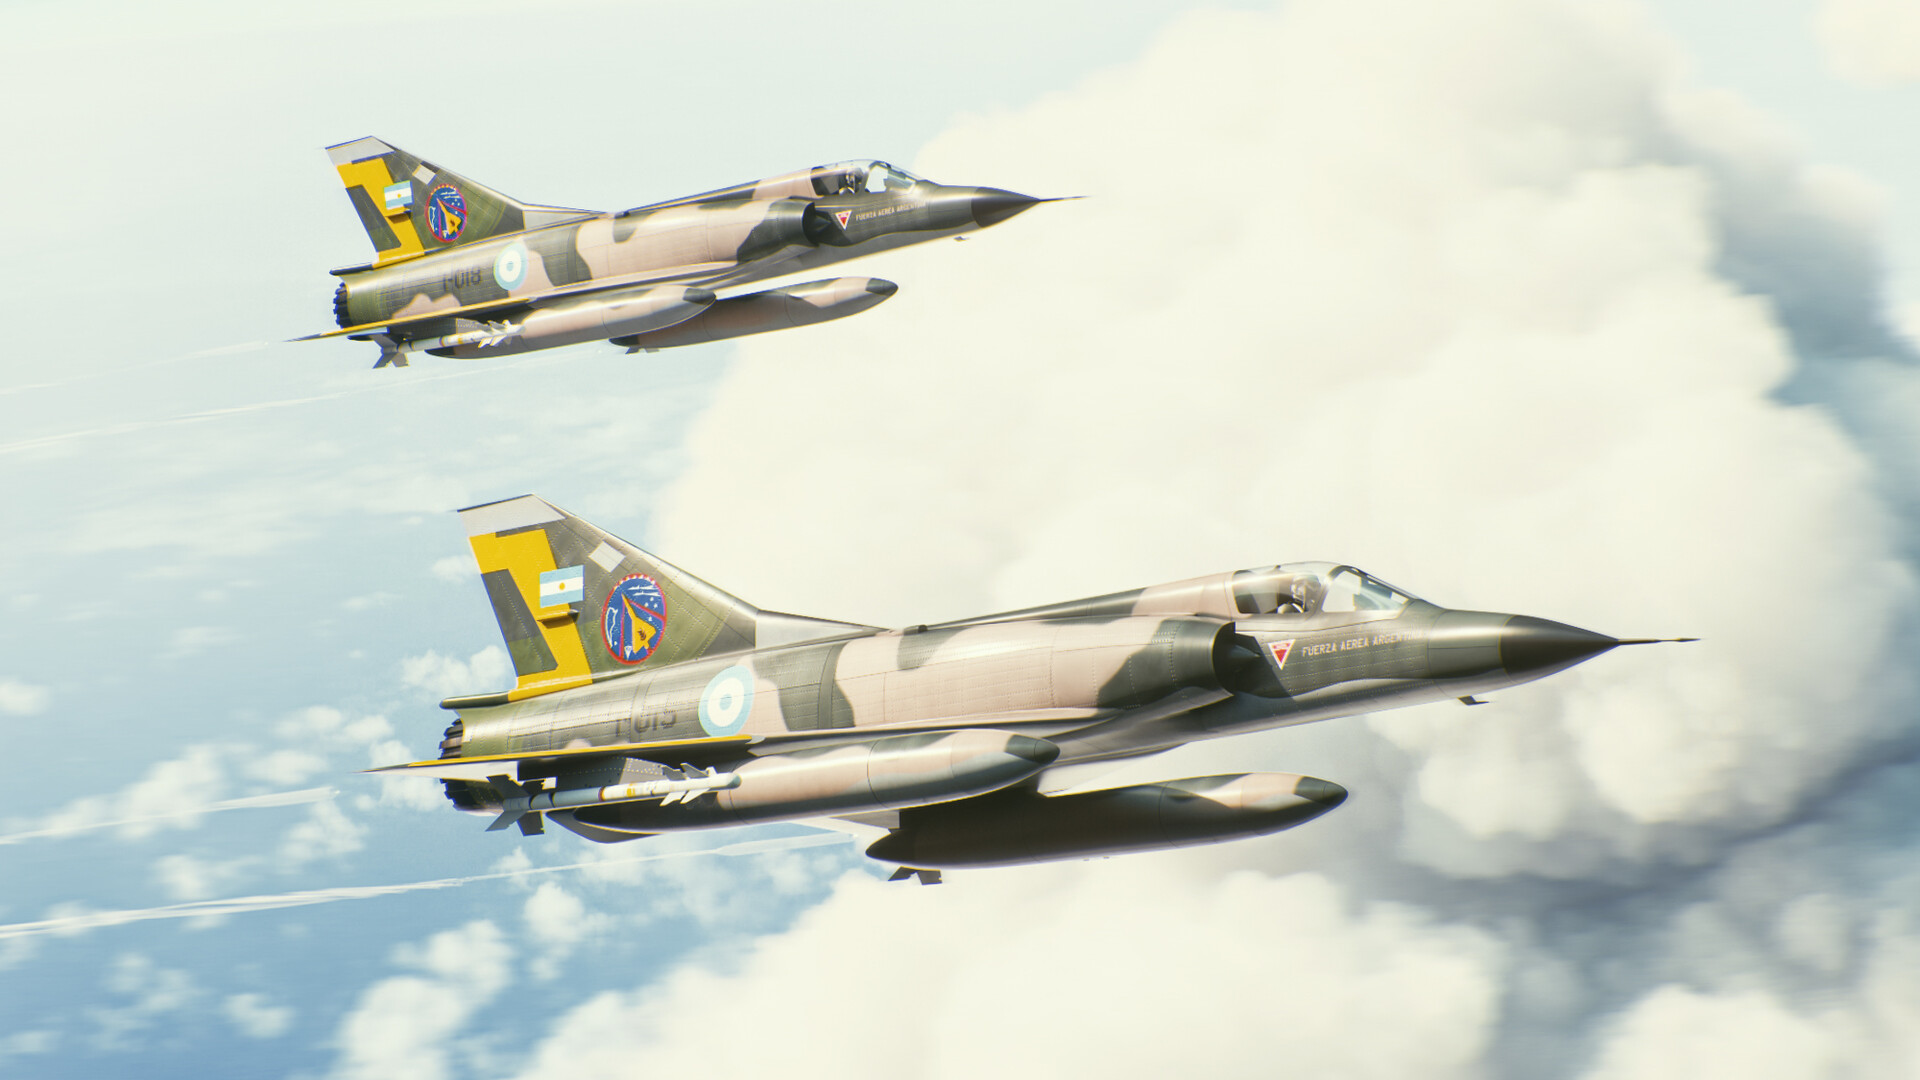 General 1920x1080 Mirage III aircraft military military aircraft artwork military vehicle Alex Klichowski jet fighter Argentina air force french aircraft vehicle clouds Dassault Aviation sky Argentine Air Force